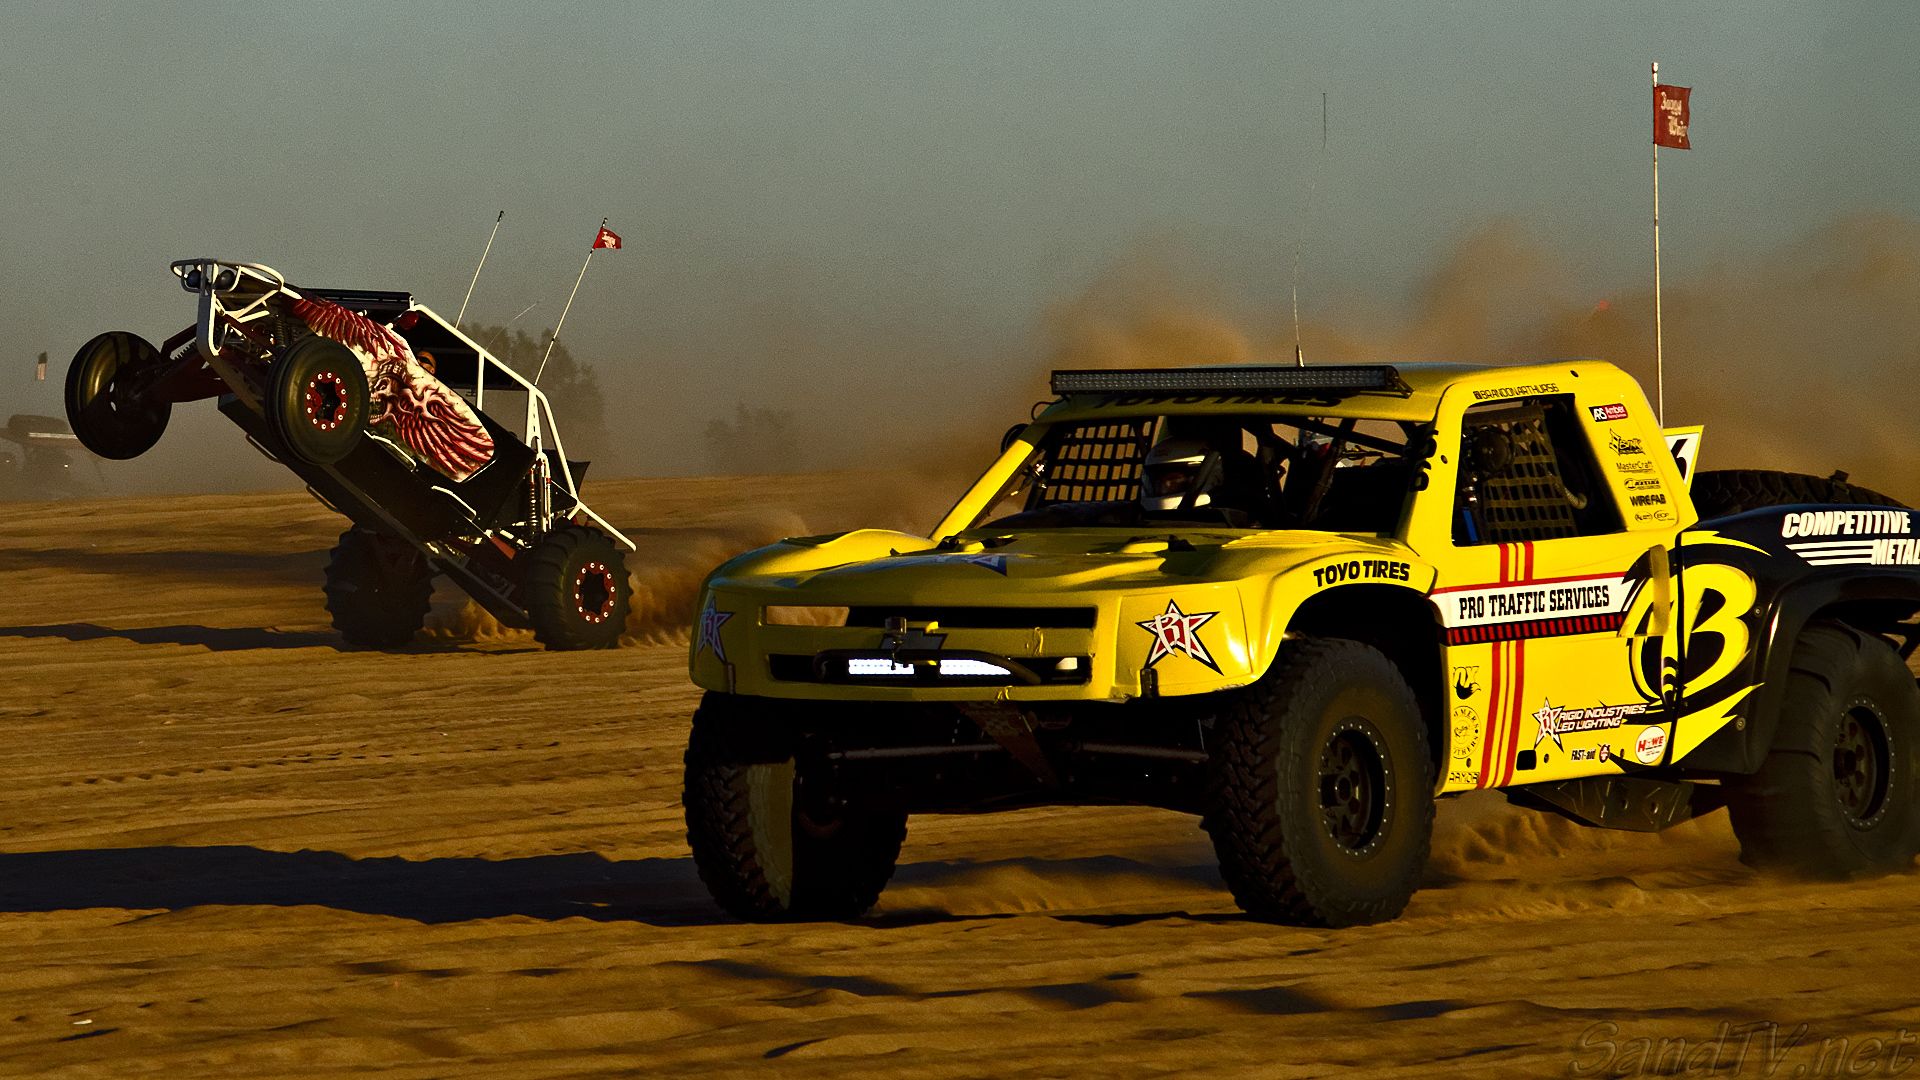 Offroad sand rails, quads, and motorcycles at the Glamis drags